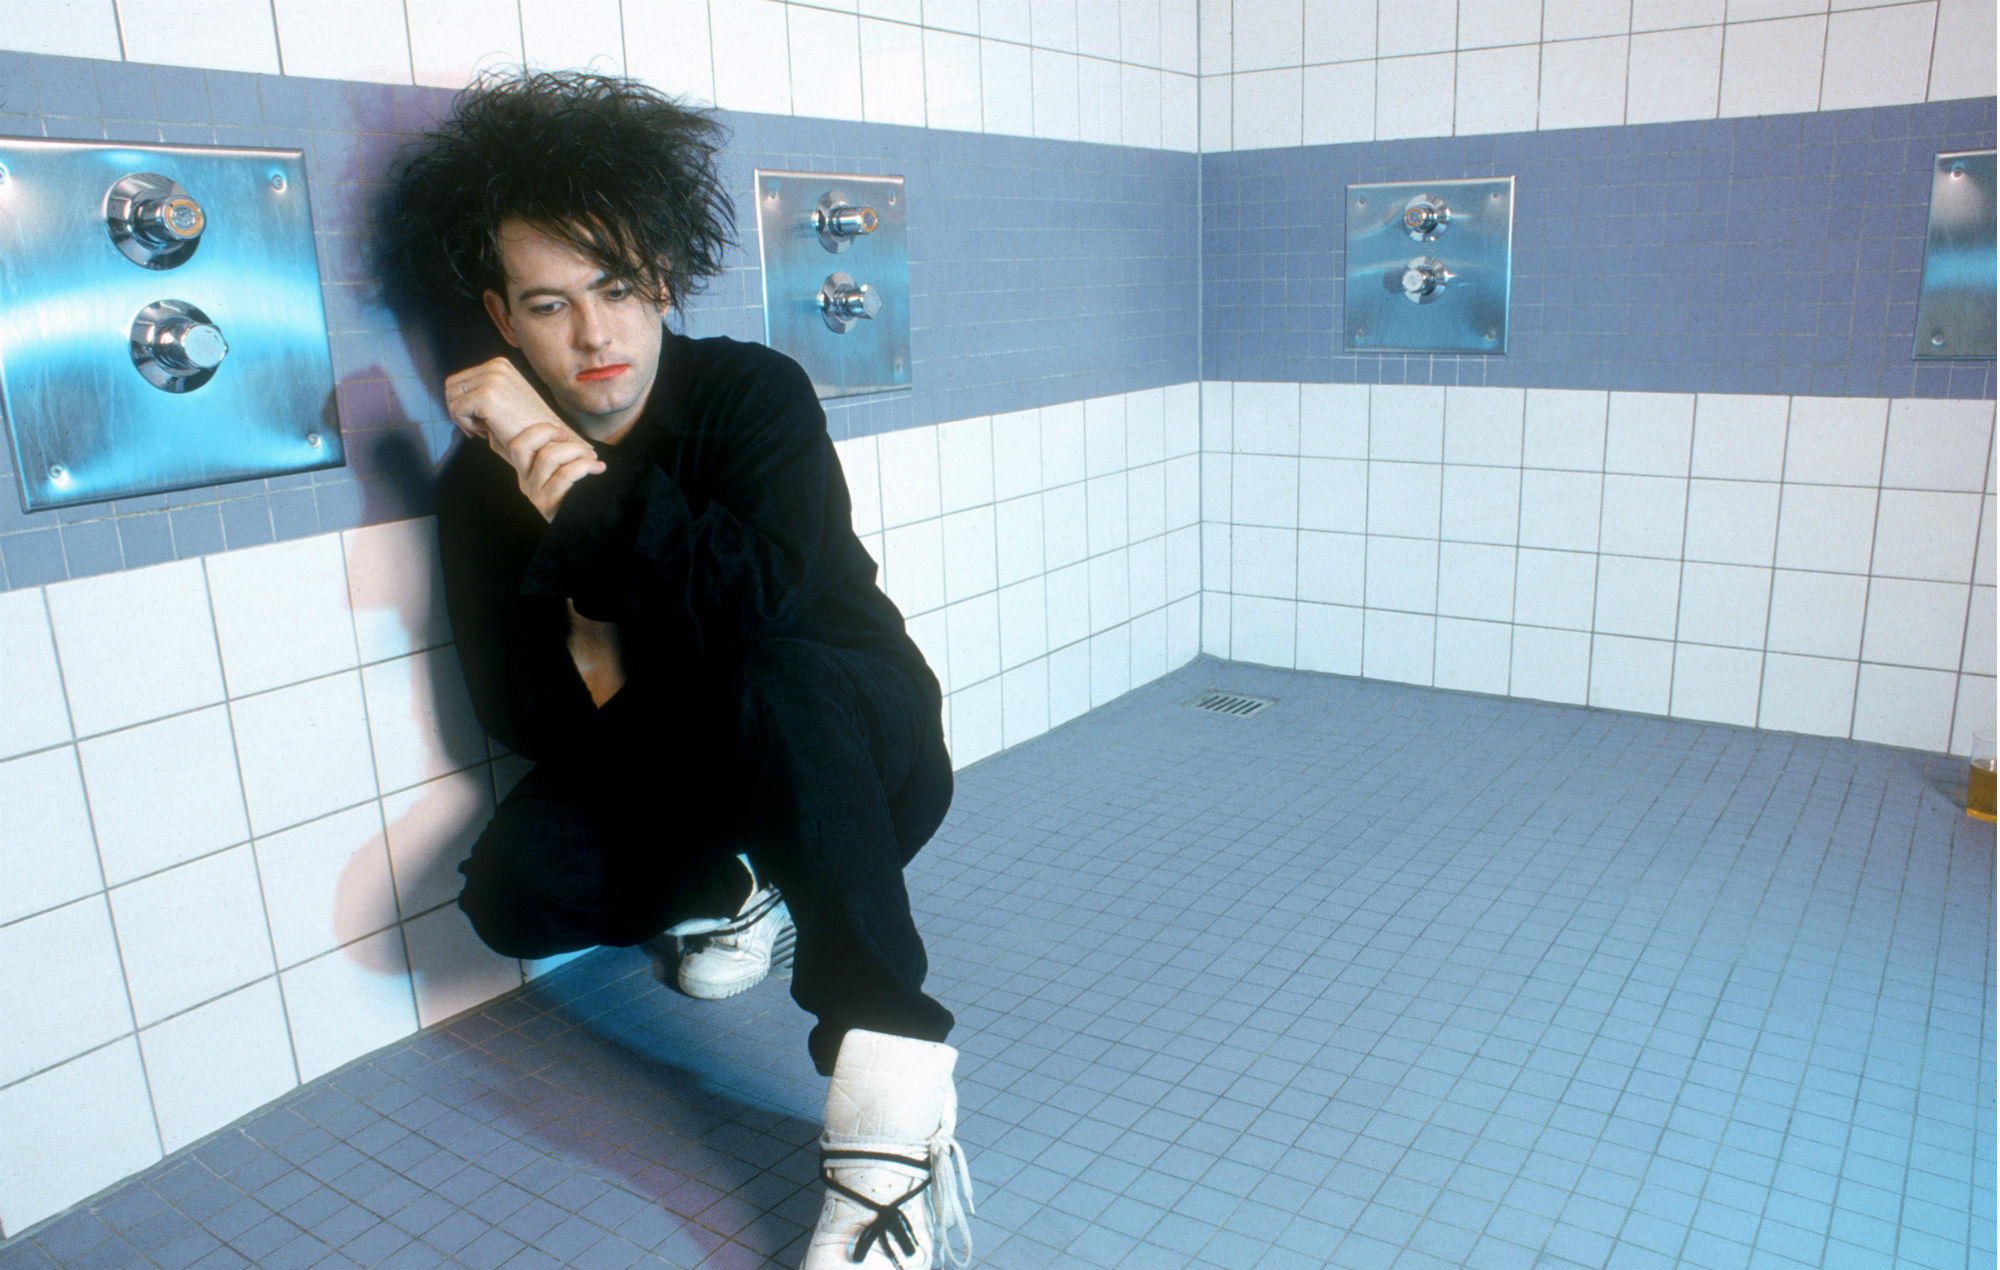 The Cure, Misconceptions, Exclusive interview, Robert Smith, 2000x1270 HD Desktop